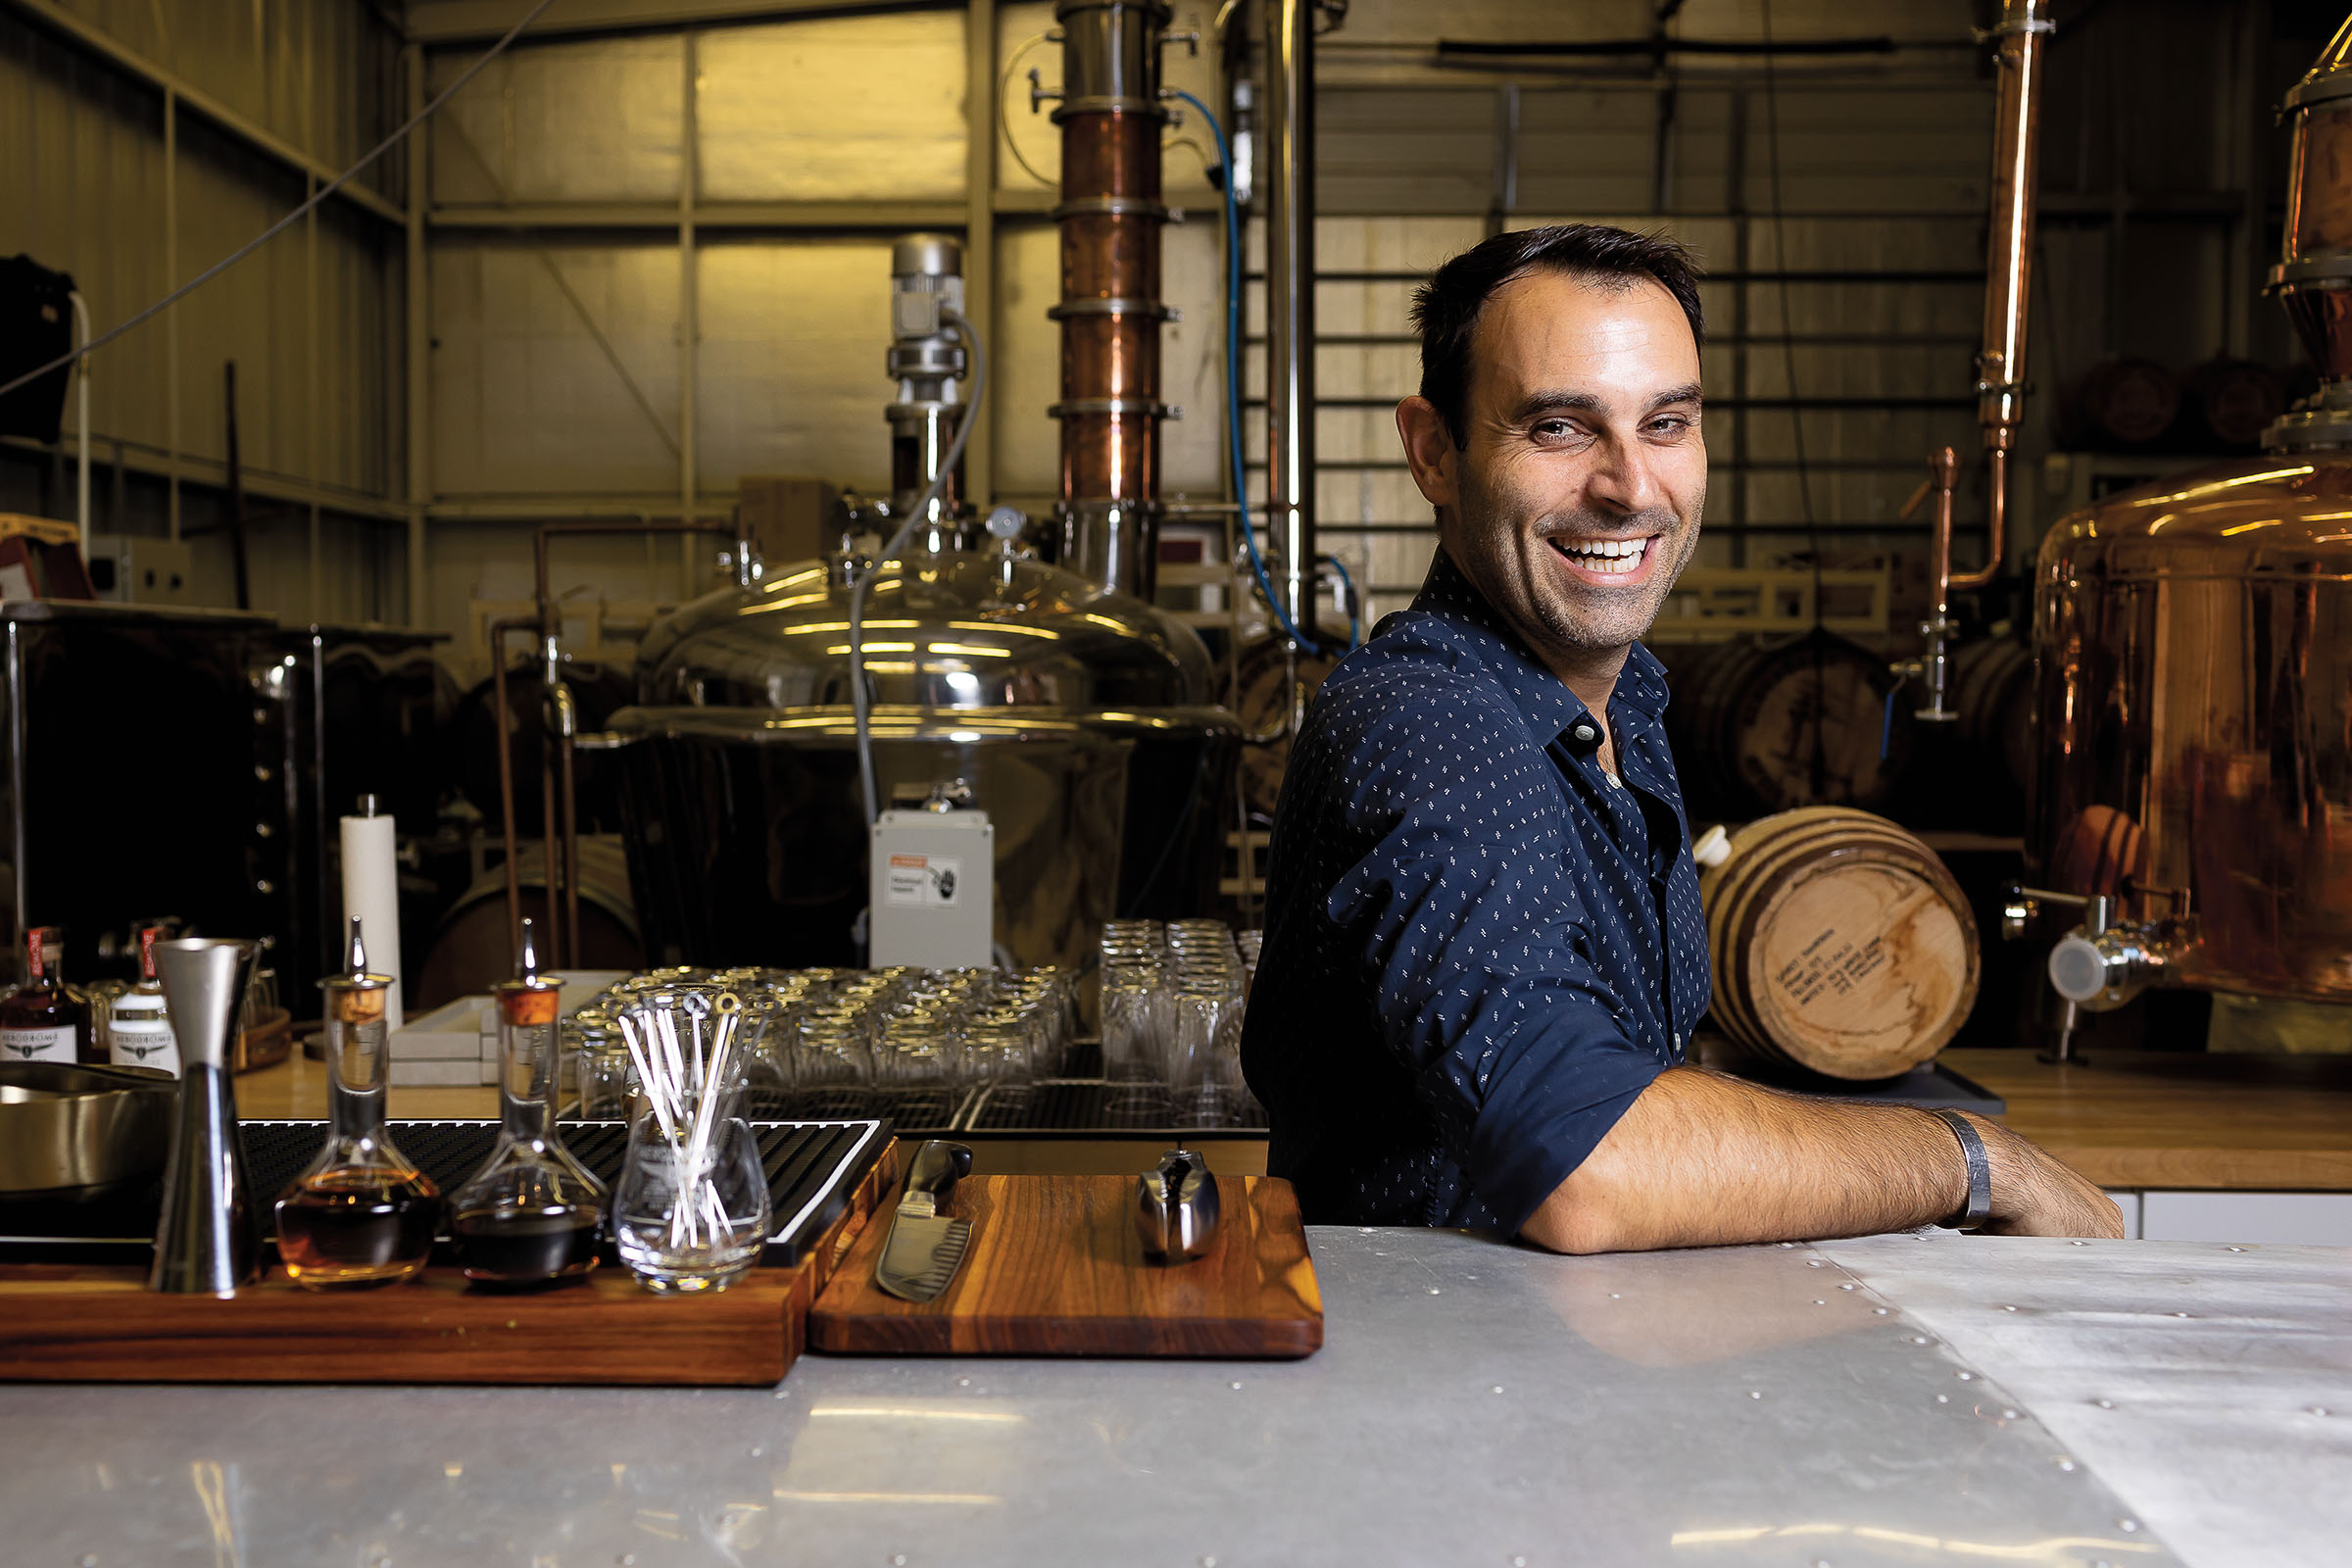 A man in a patterned blue collared shirt laughs with his back to glass and metal distilling equipment